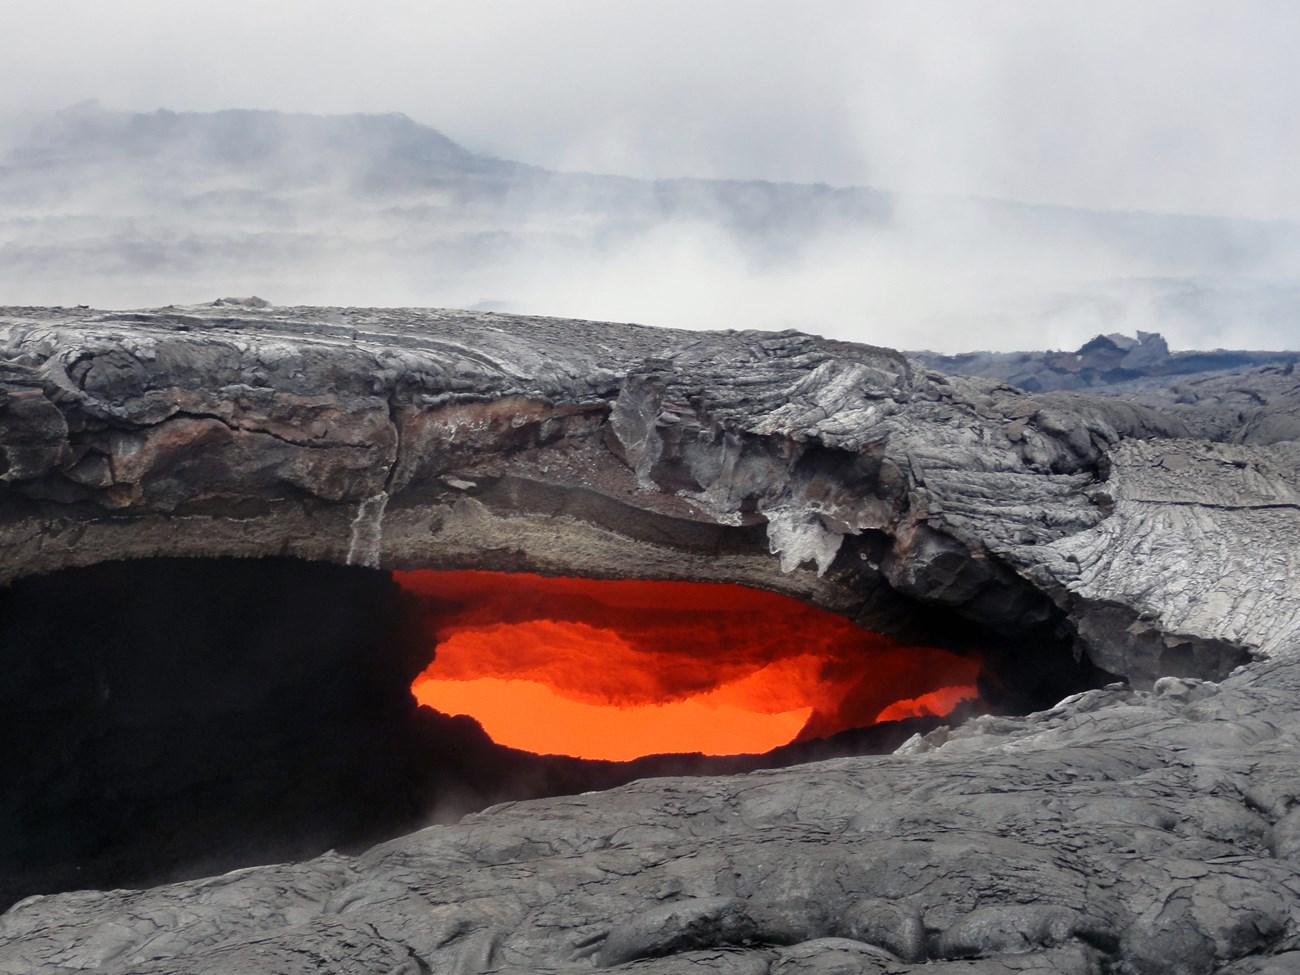 Photo of molten lava flowing beneath a hardened lava surface.